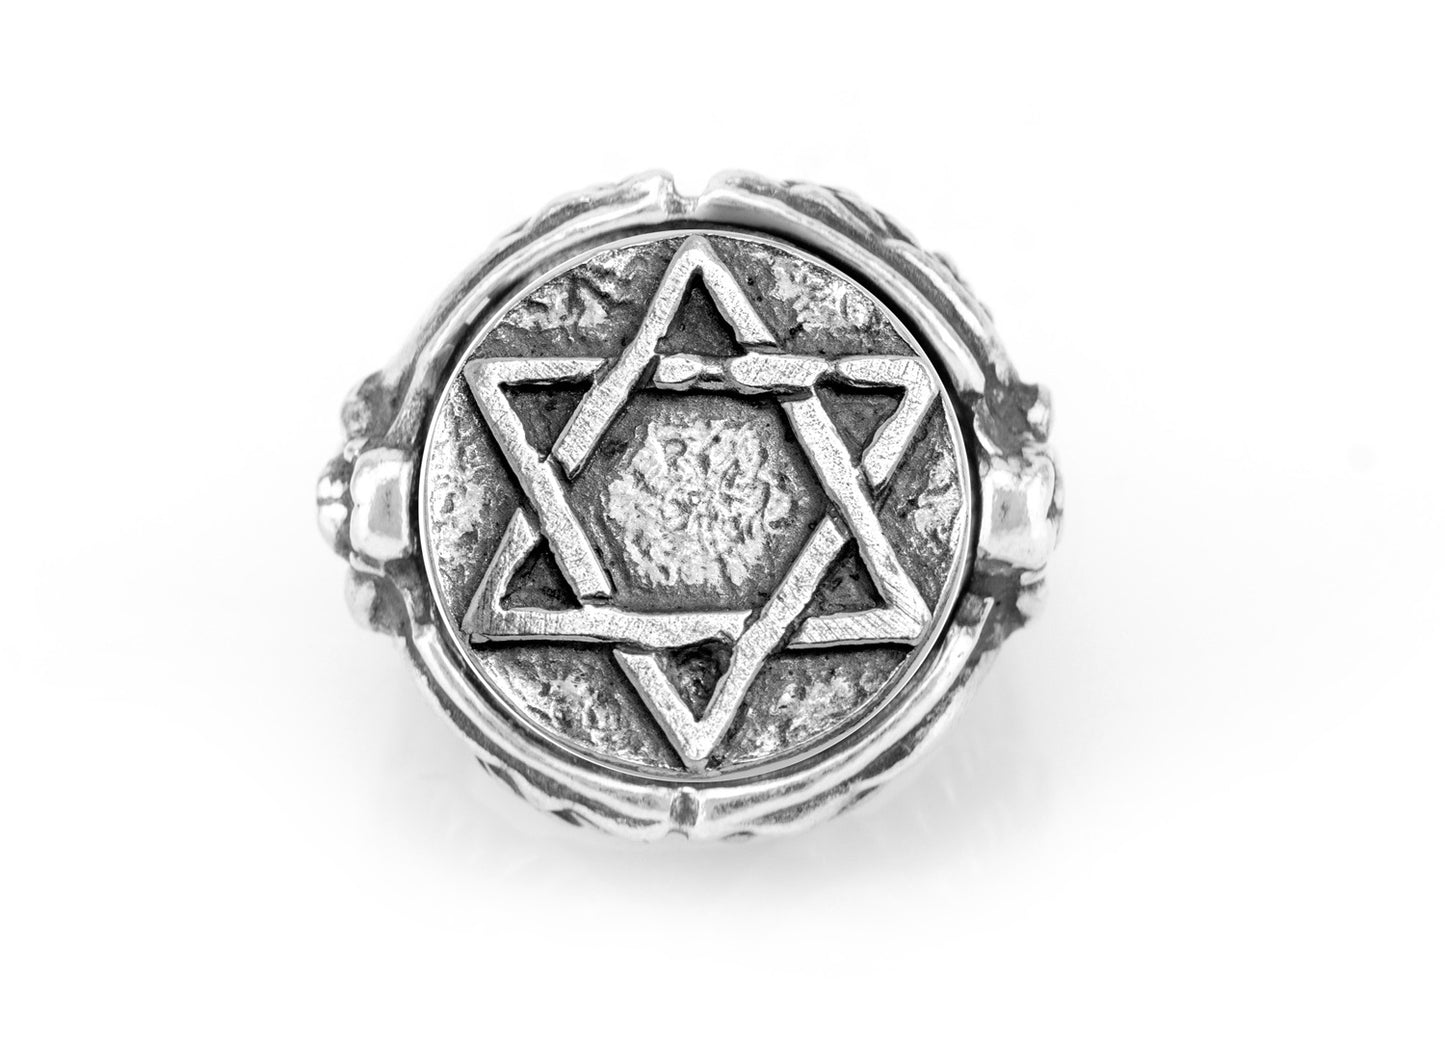 coin ring with the Star of David medallion on Nike ring